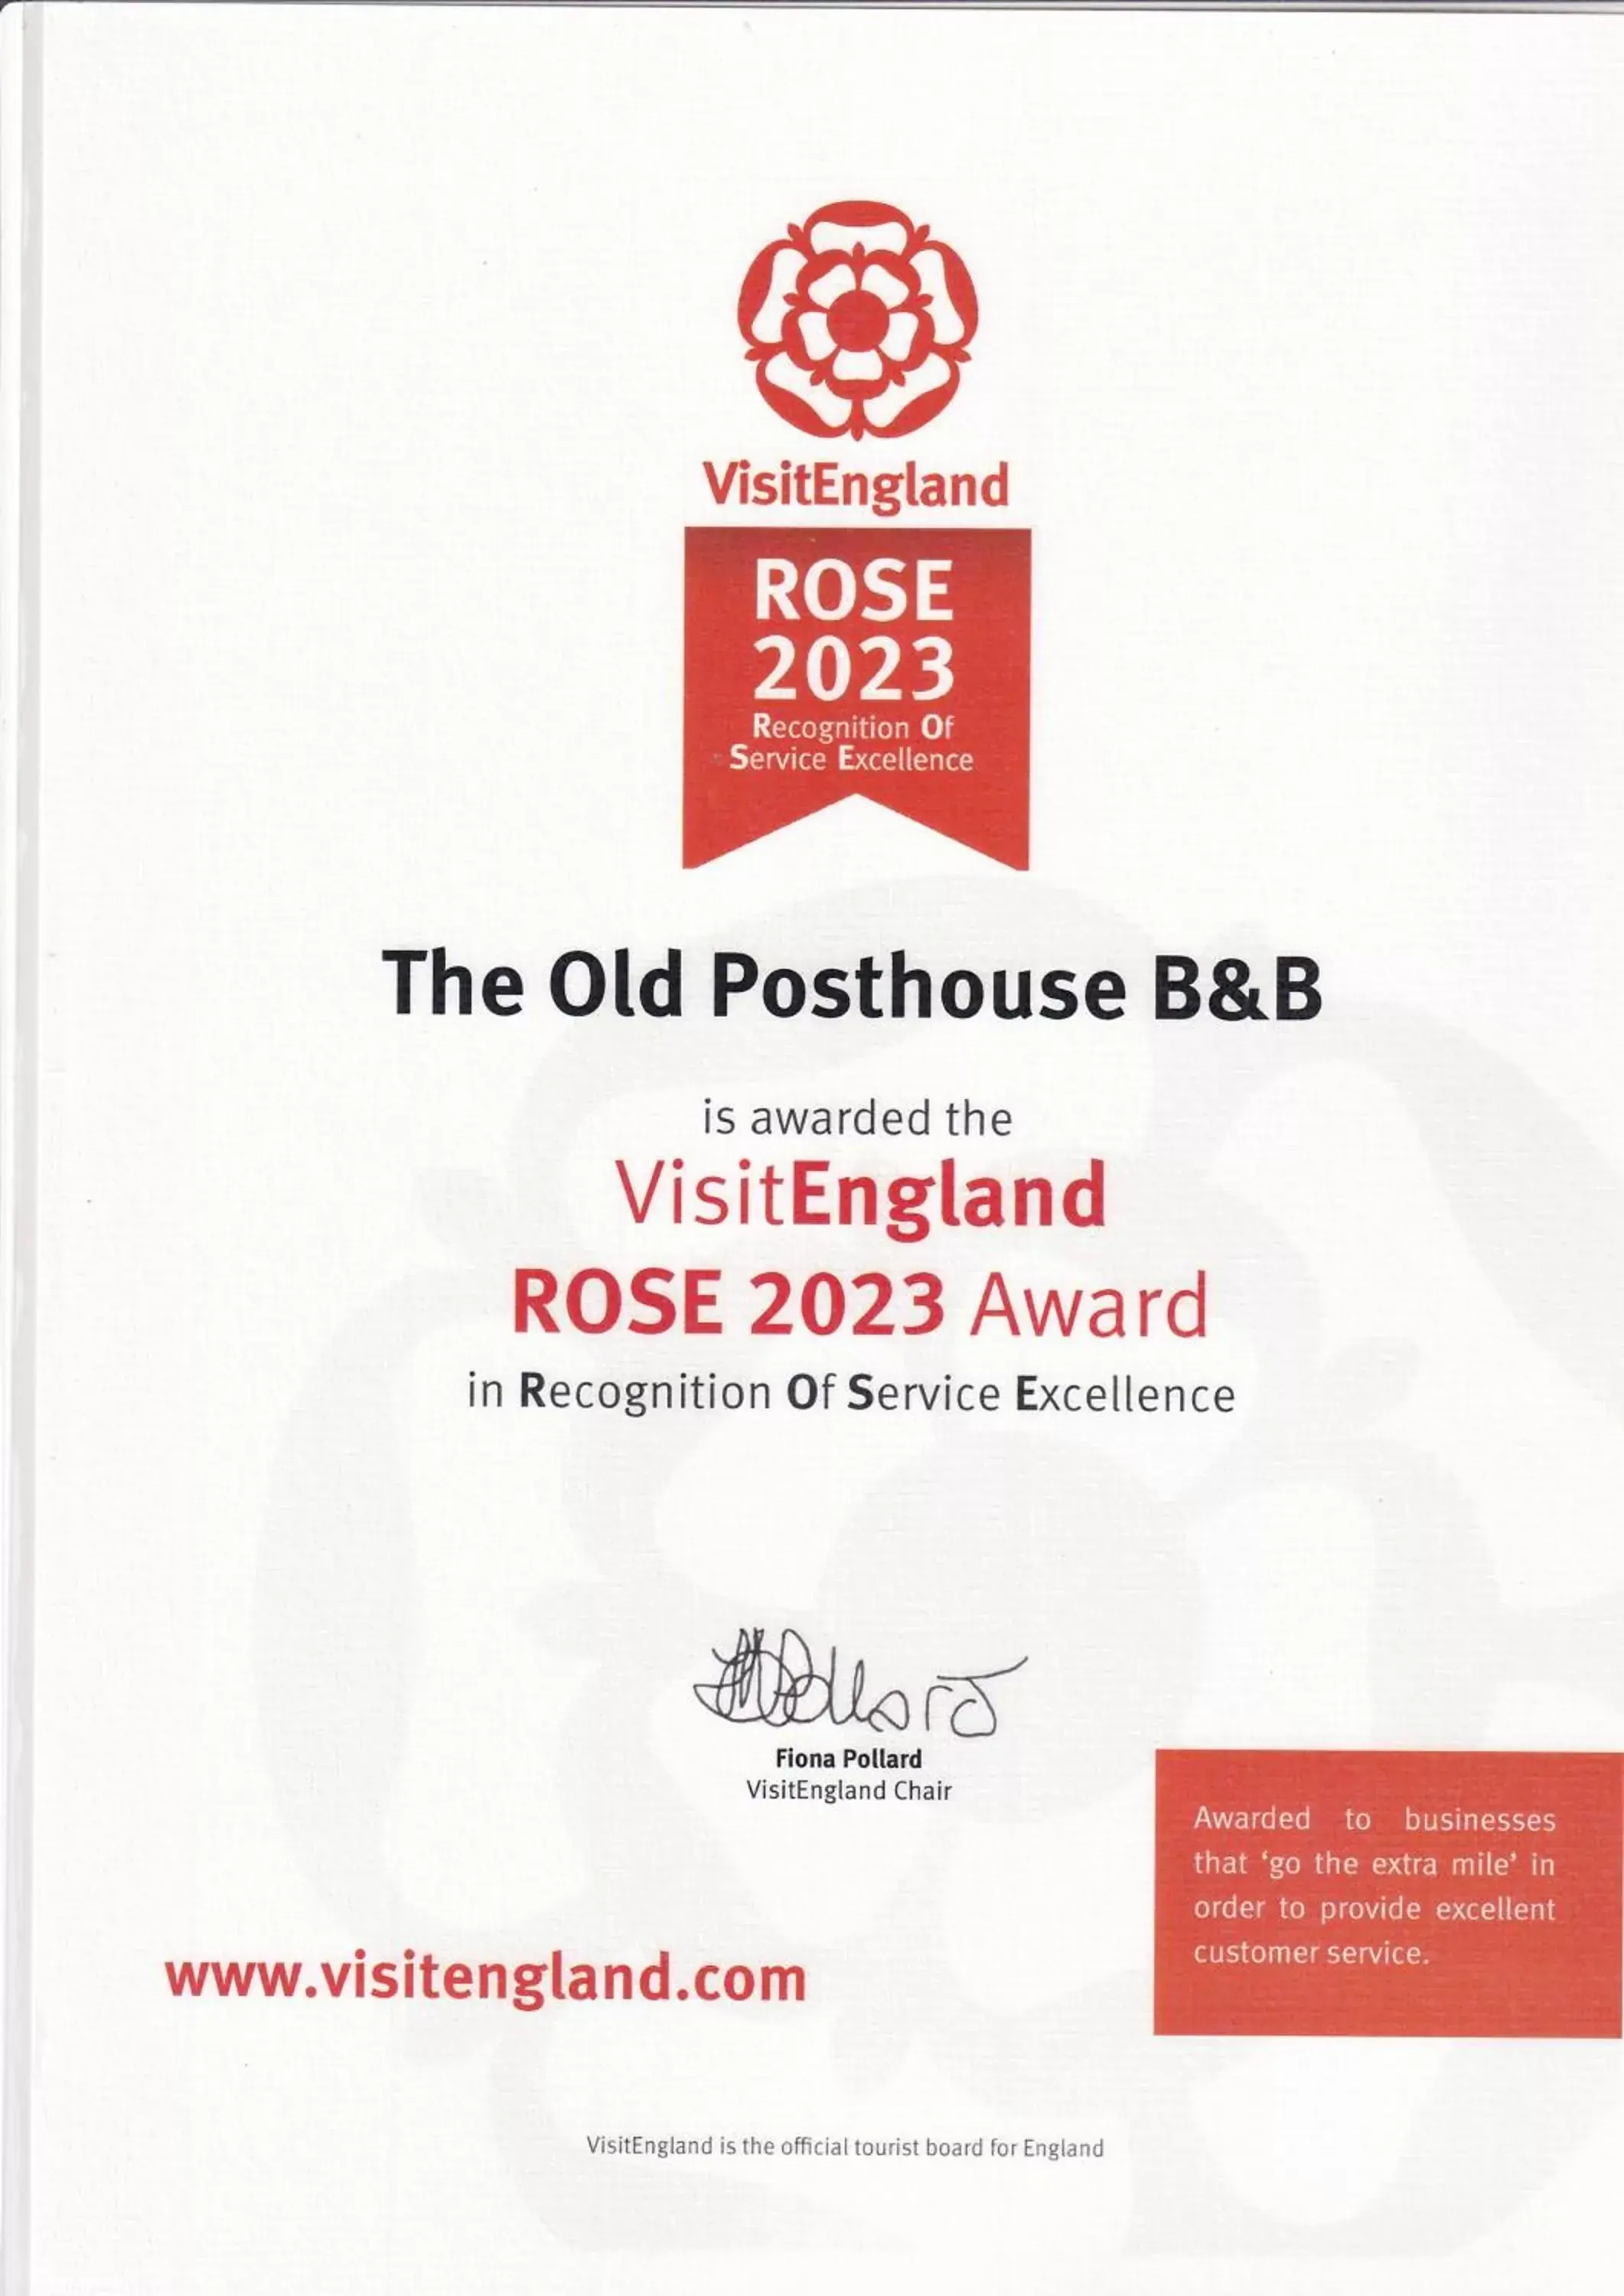 Certificate/Award in The Old Posthouse B&B